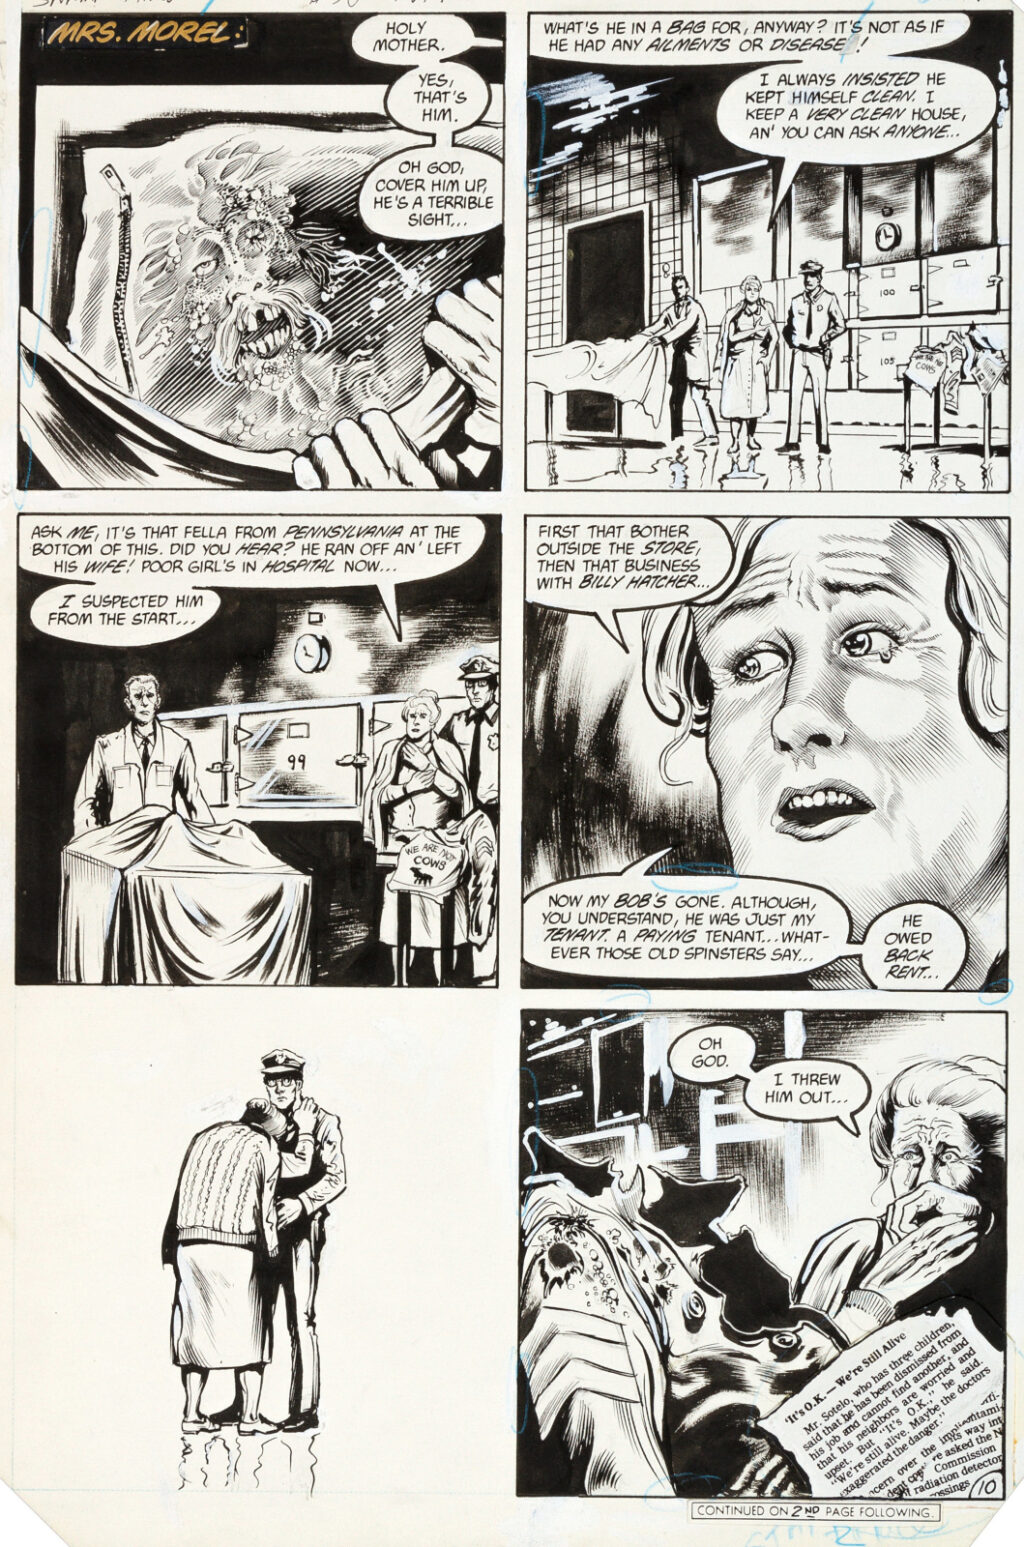 Saga of the Swamp Thing issue 36 page 10 by Stephen Bissette and John Totleben